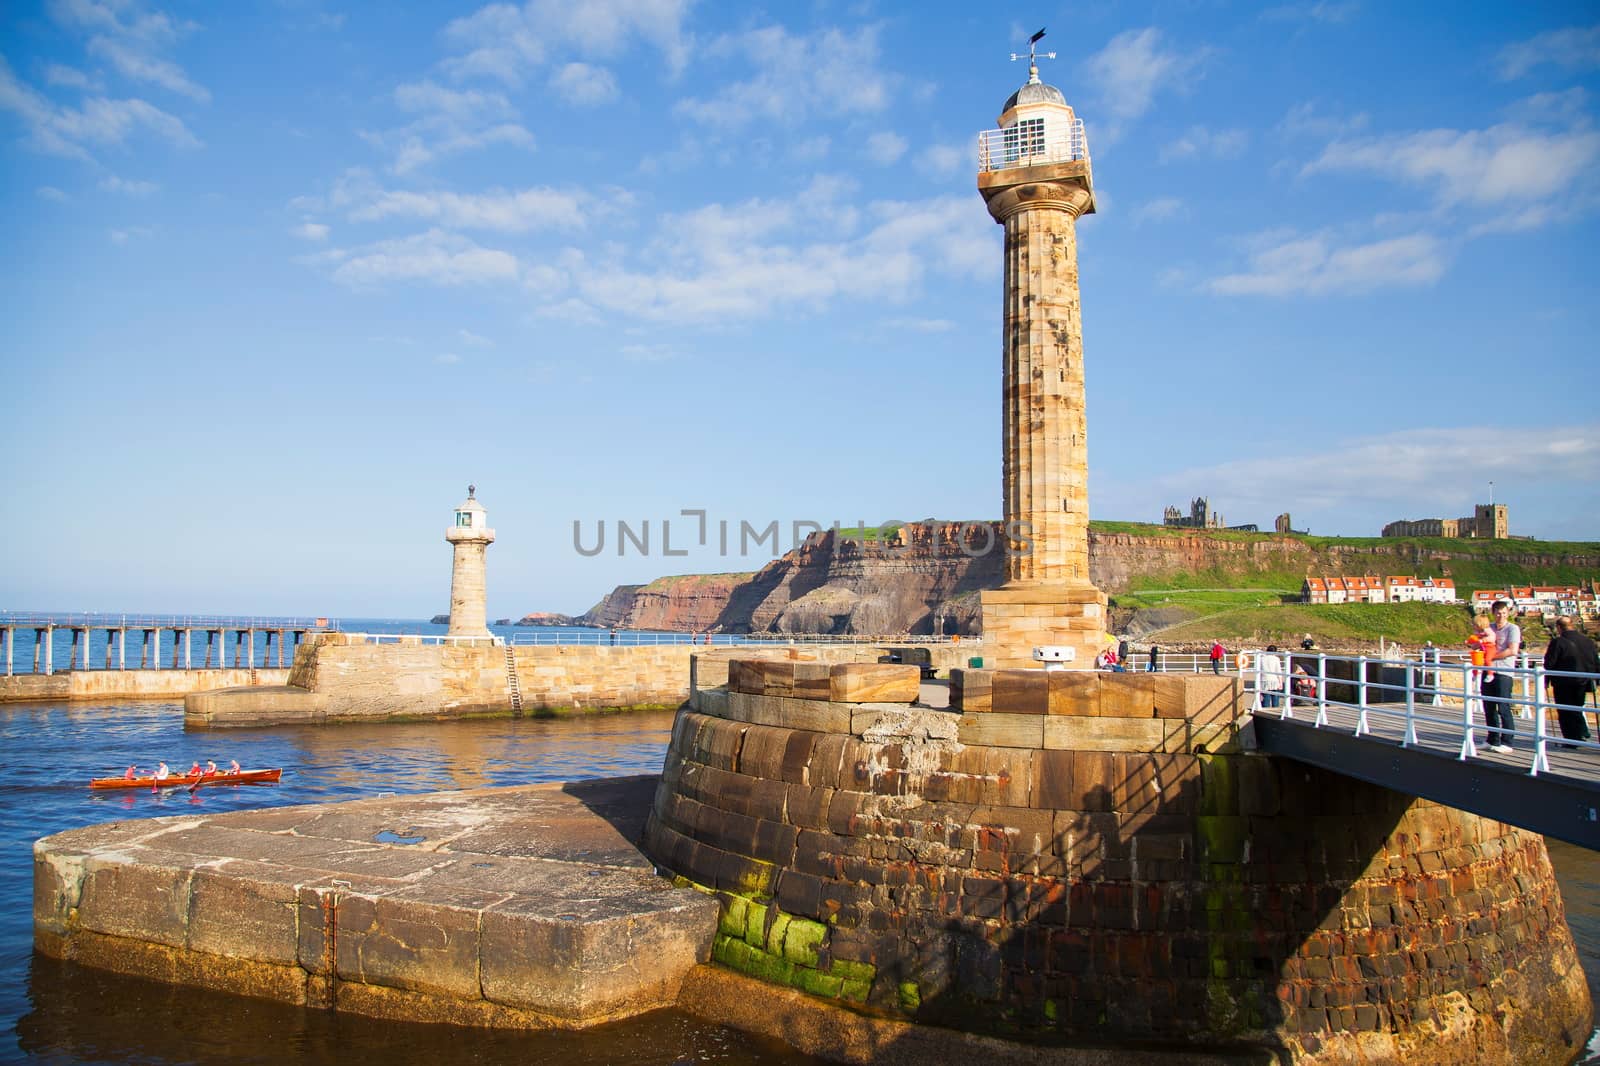 The harbour and lighthouses of Whitby